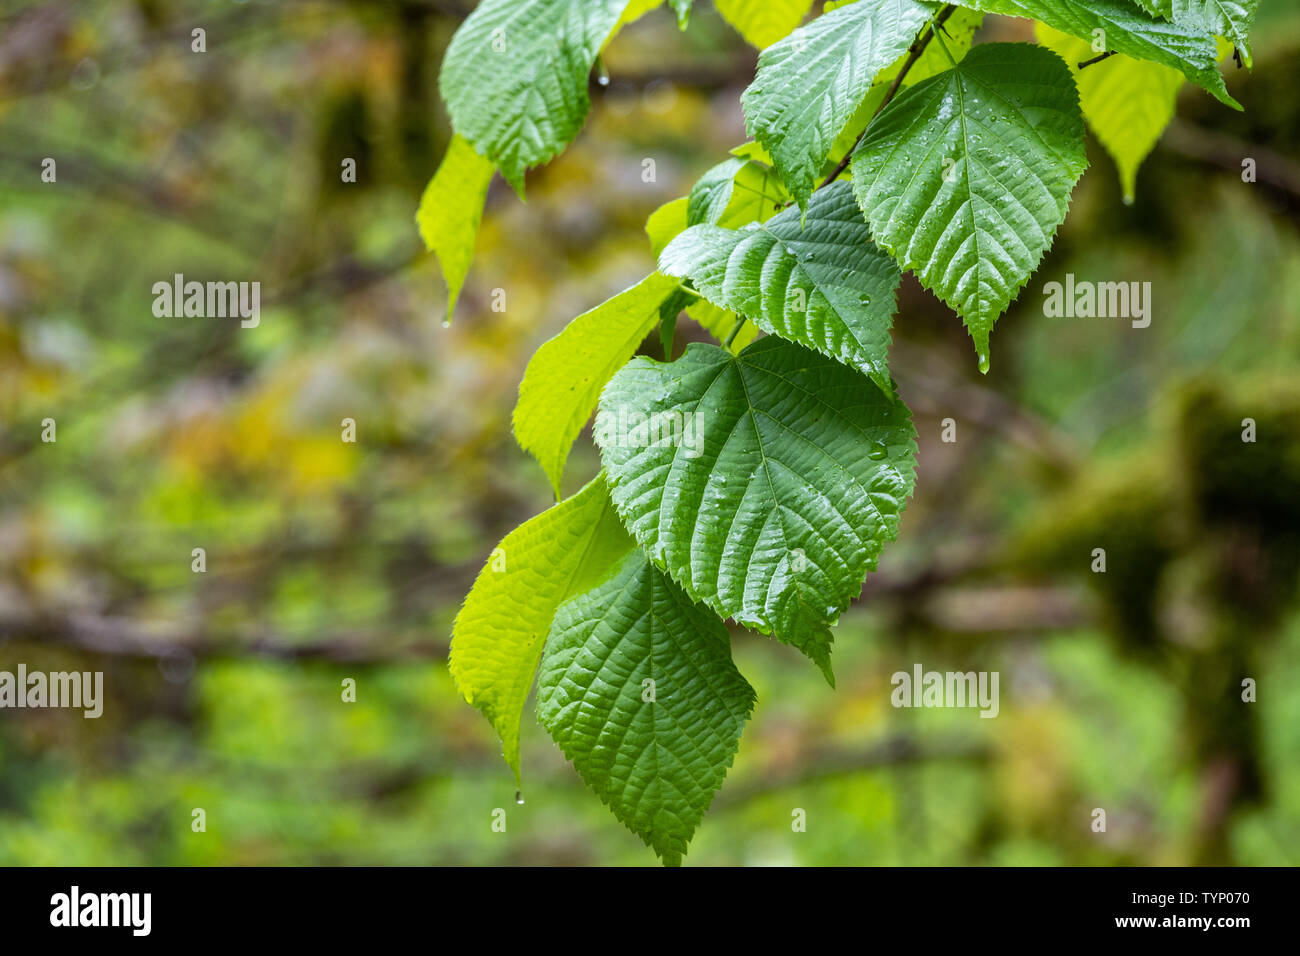 Green linden leaves with water drops after rain. Cloudy weather in the forest or park. Tilia dasystyla is a deciduous lime tree species Stock Photo